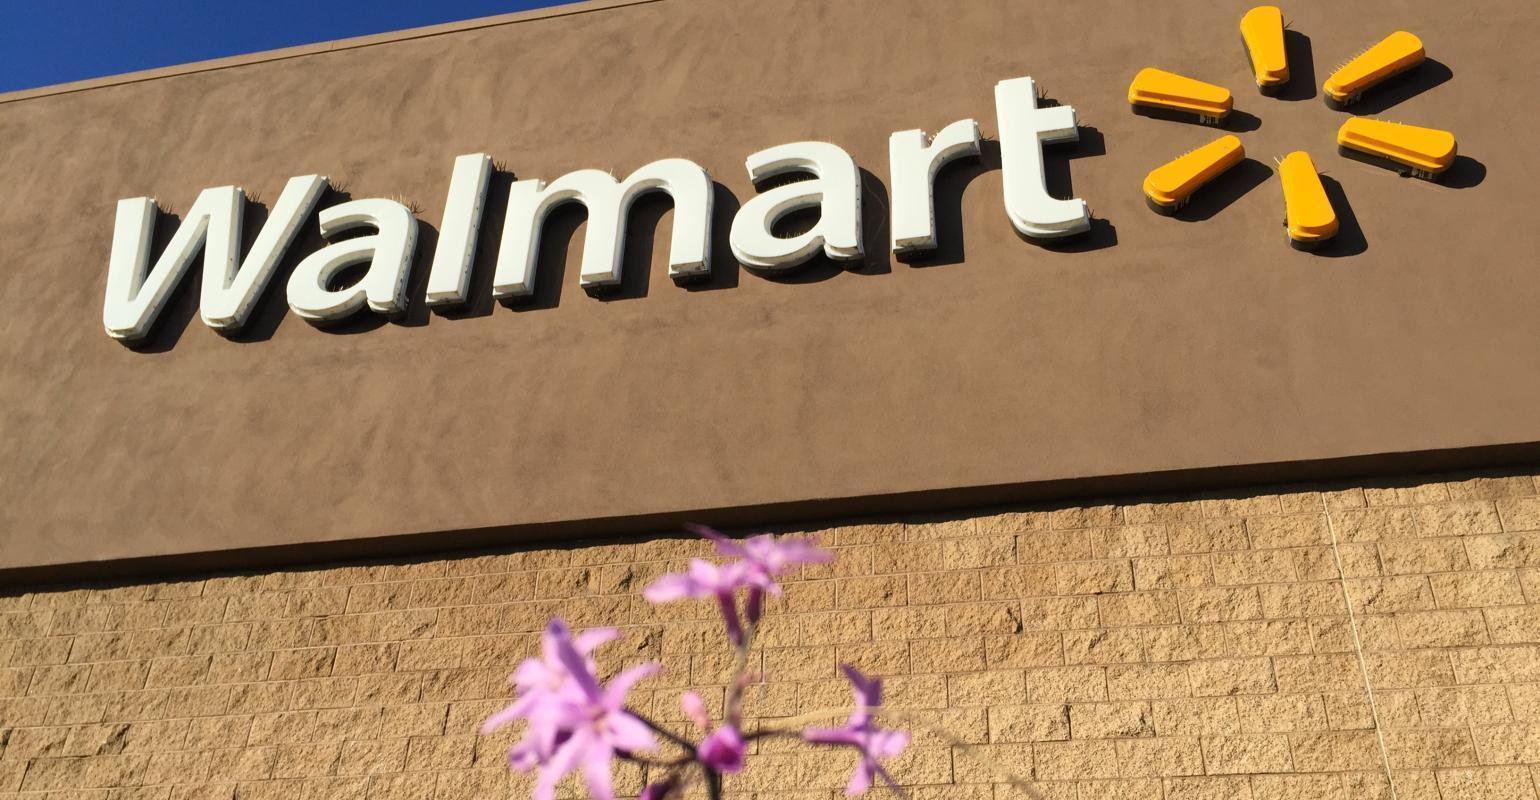 Big Changes at Walmart: Over a Thousand Texas Jobs at Risk as Offices Consolidate